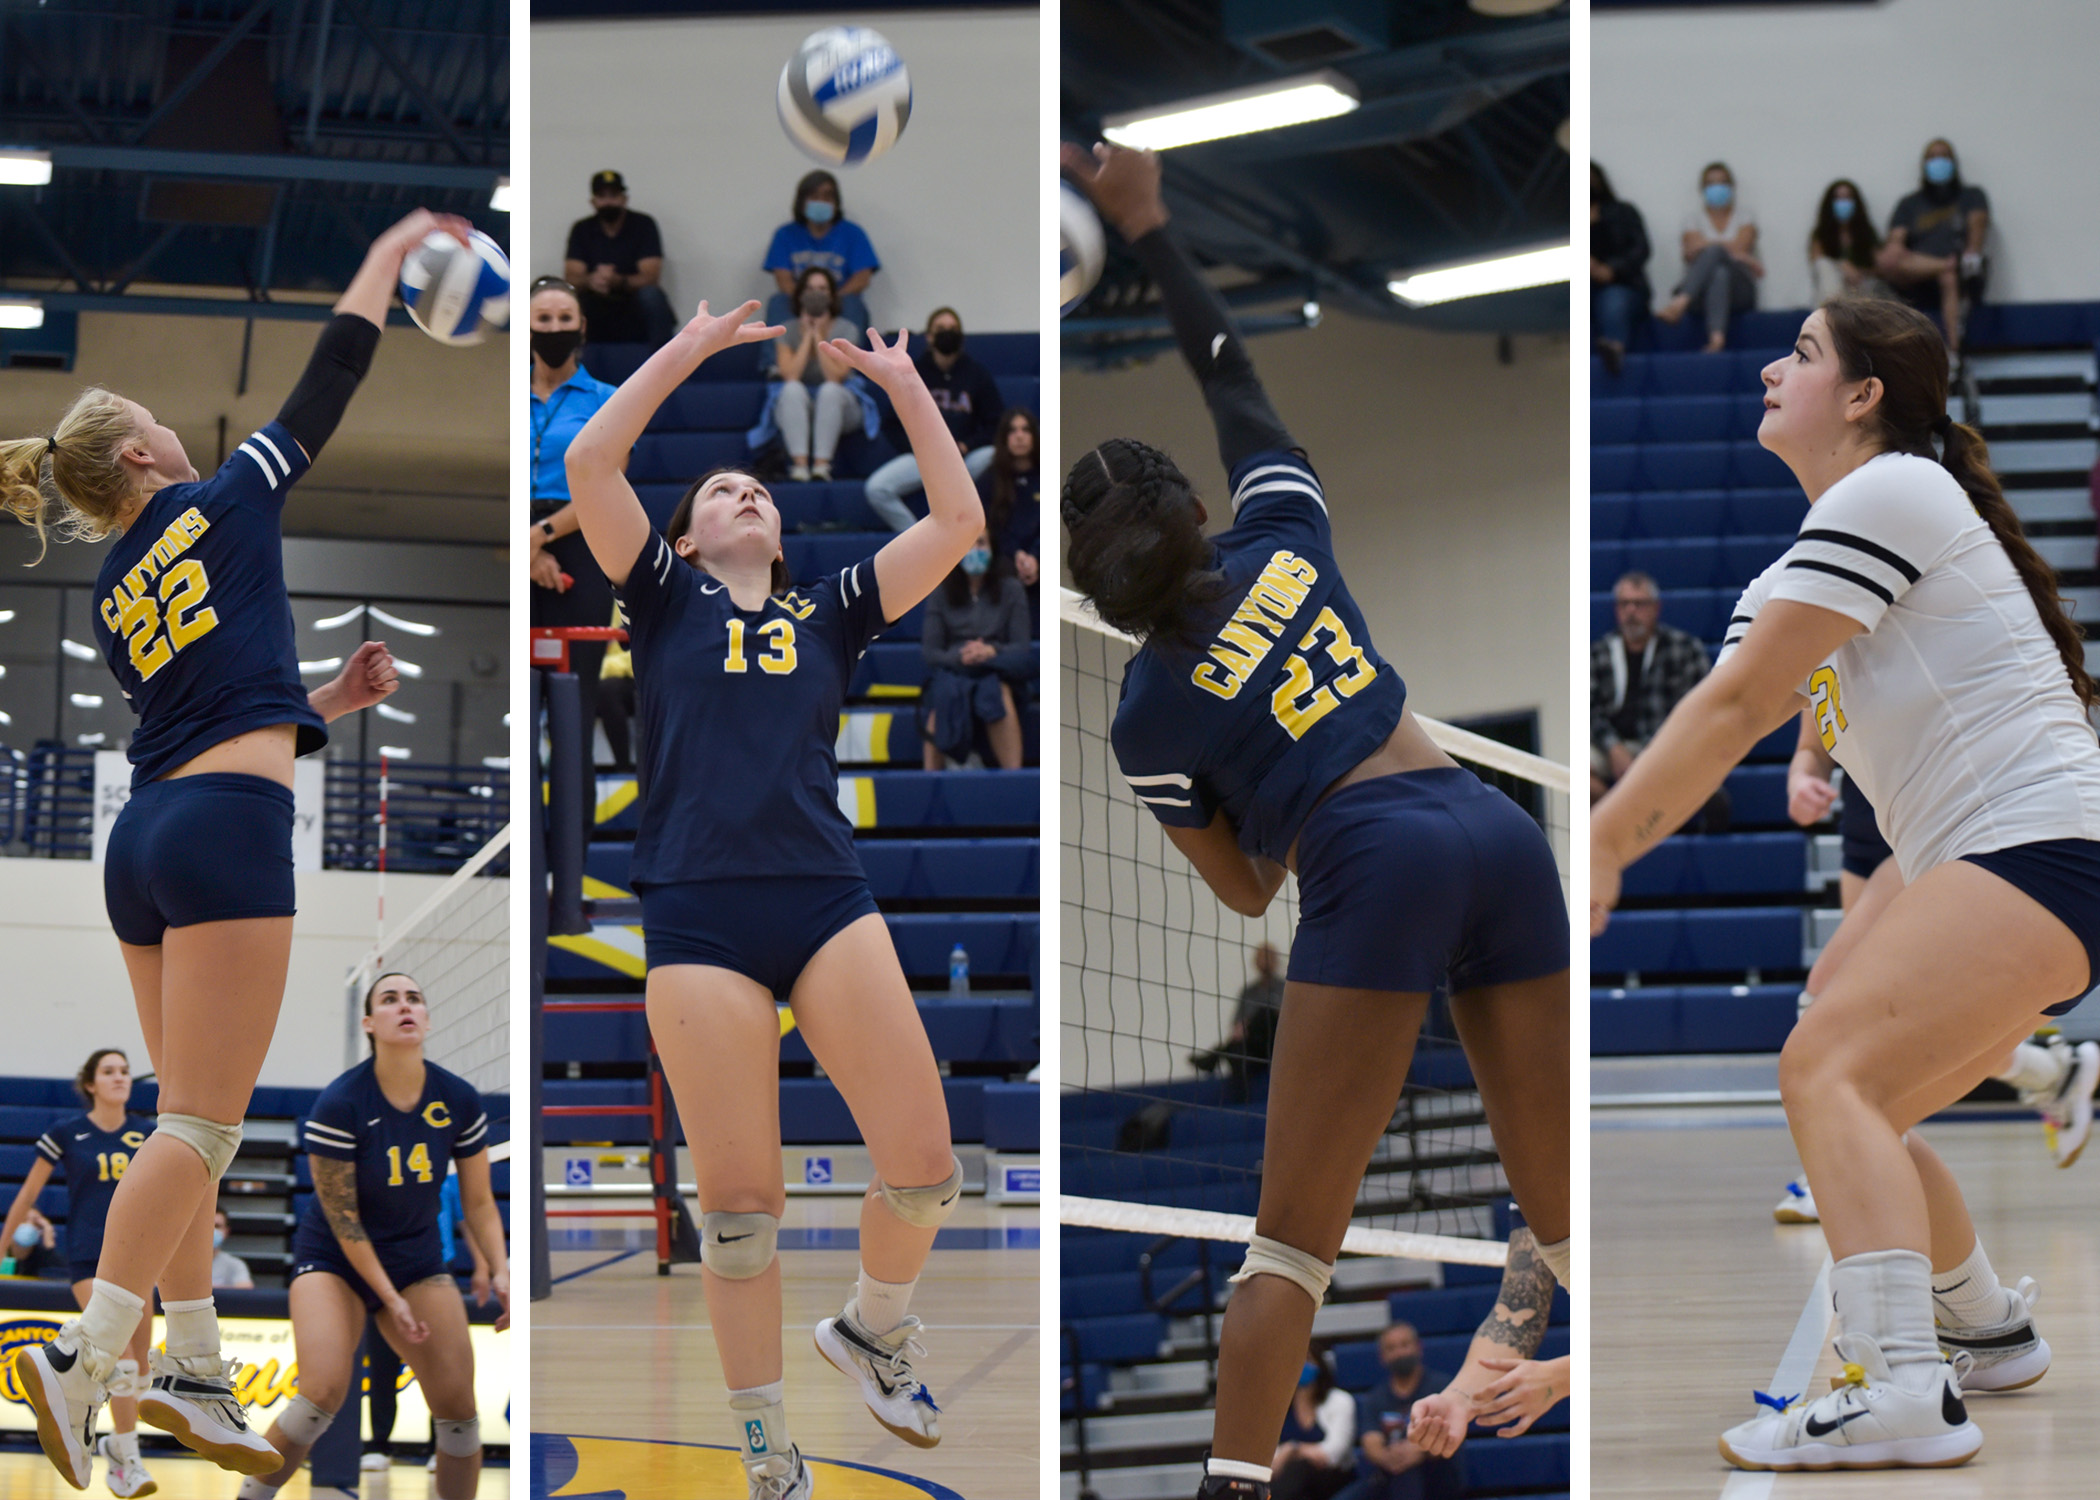 (from left to right) College of the Canyons had six players earn All-Western State Conference (WSC), South Division honors including Caitlin Liebe, Abby Sherman, Damani Harvey and Rhiannon Boddy. &mdash;Mari Kneisel/COC Sports Information